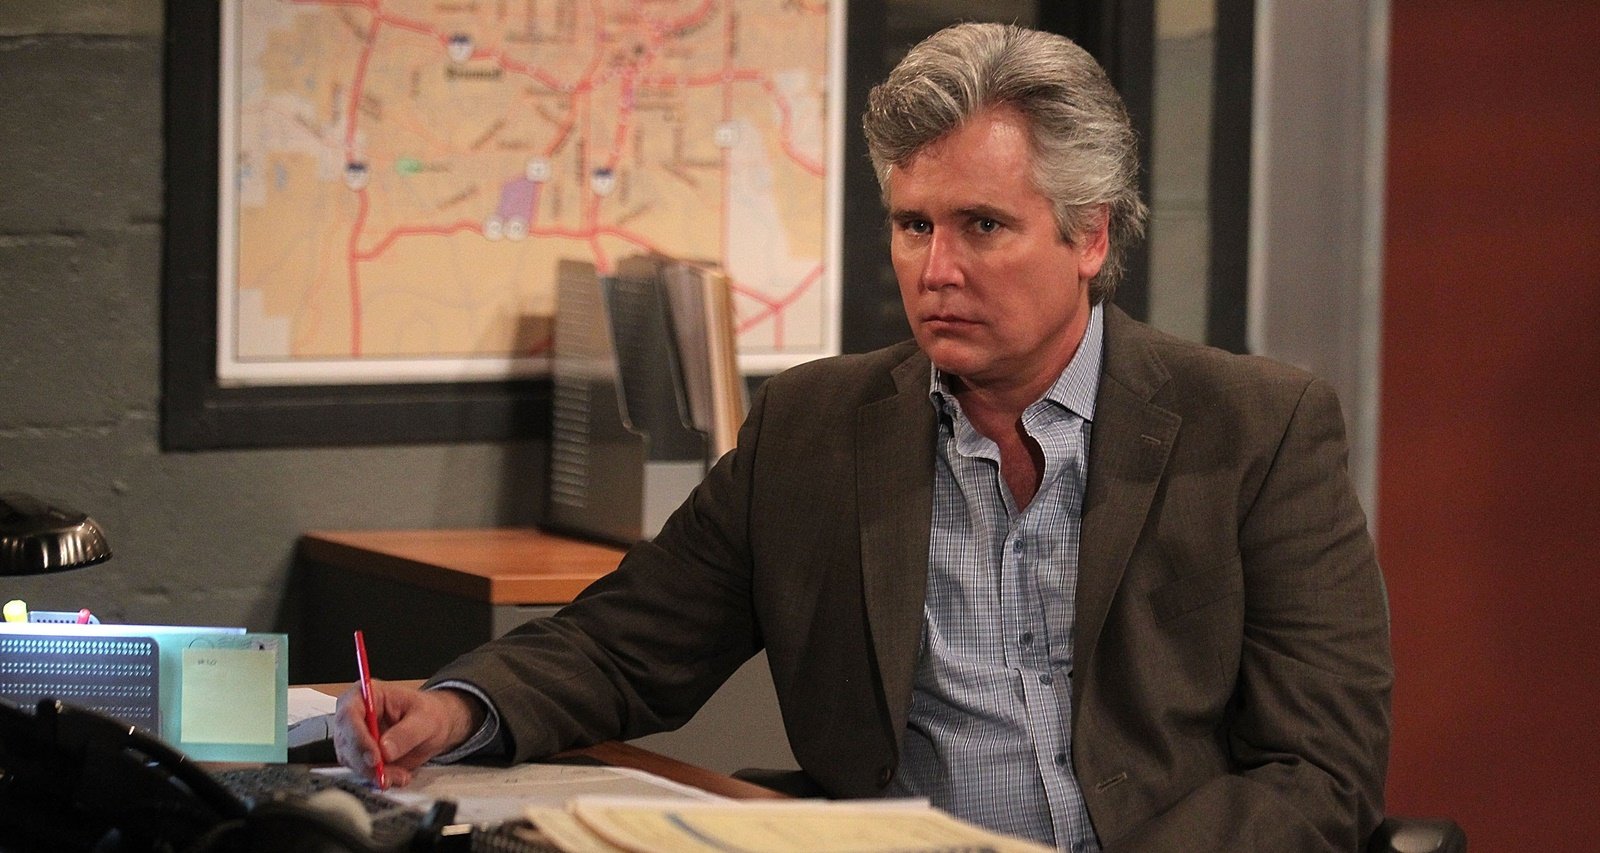 Daytime Soaps: Comings and Goings Sept 30 to Oct 6 Michael E. Knight’s “GH” Role Revealed